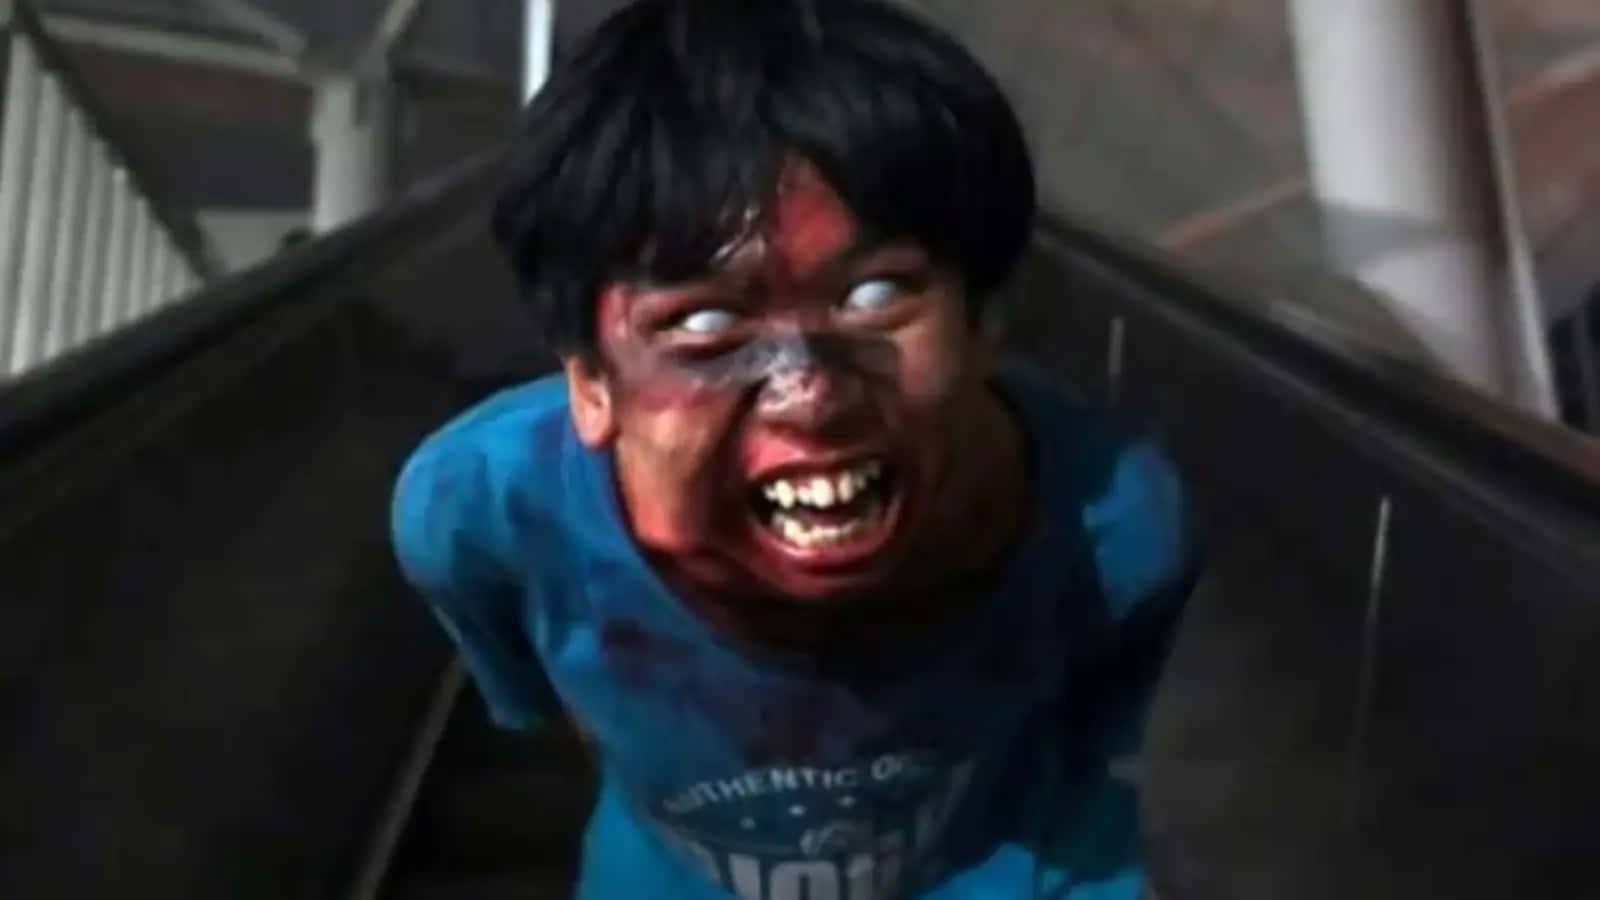 A Boy With Blood On His Face On An Escalator